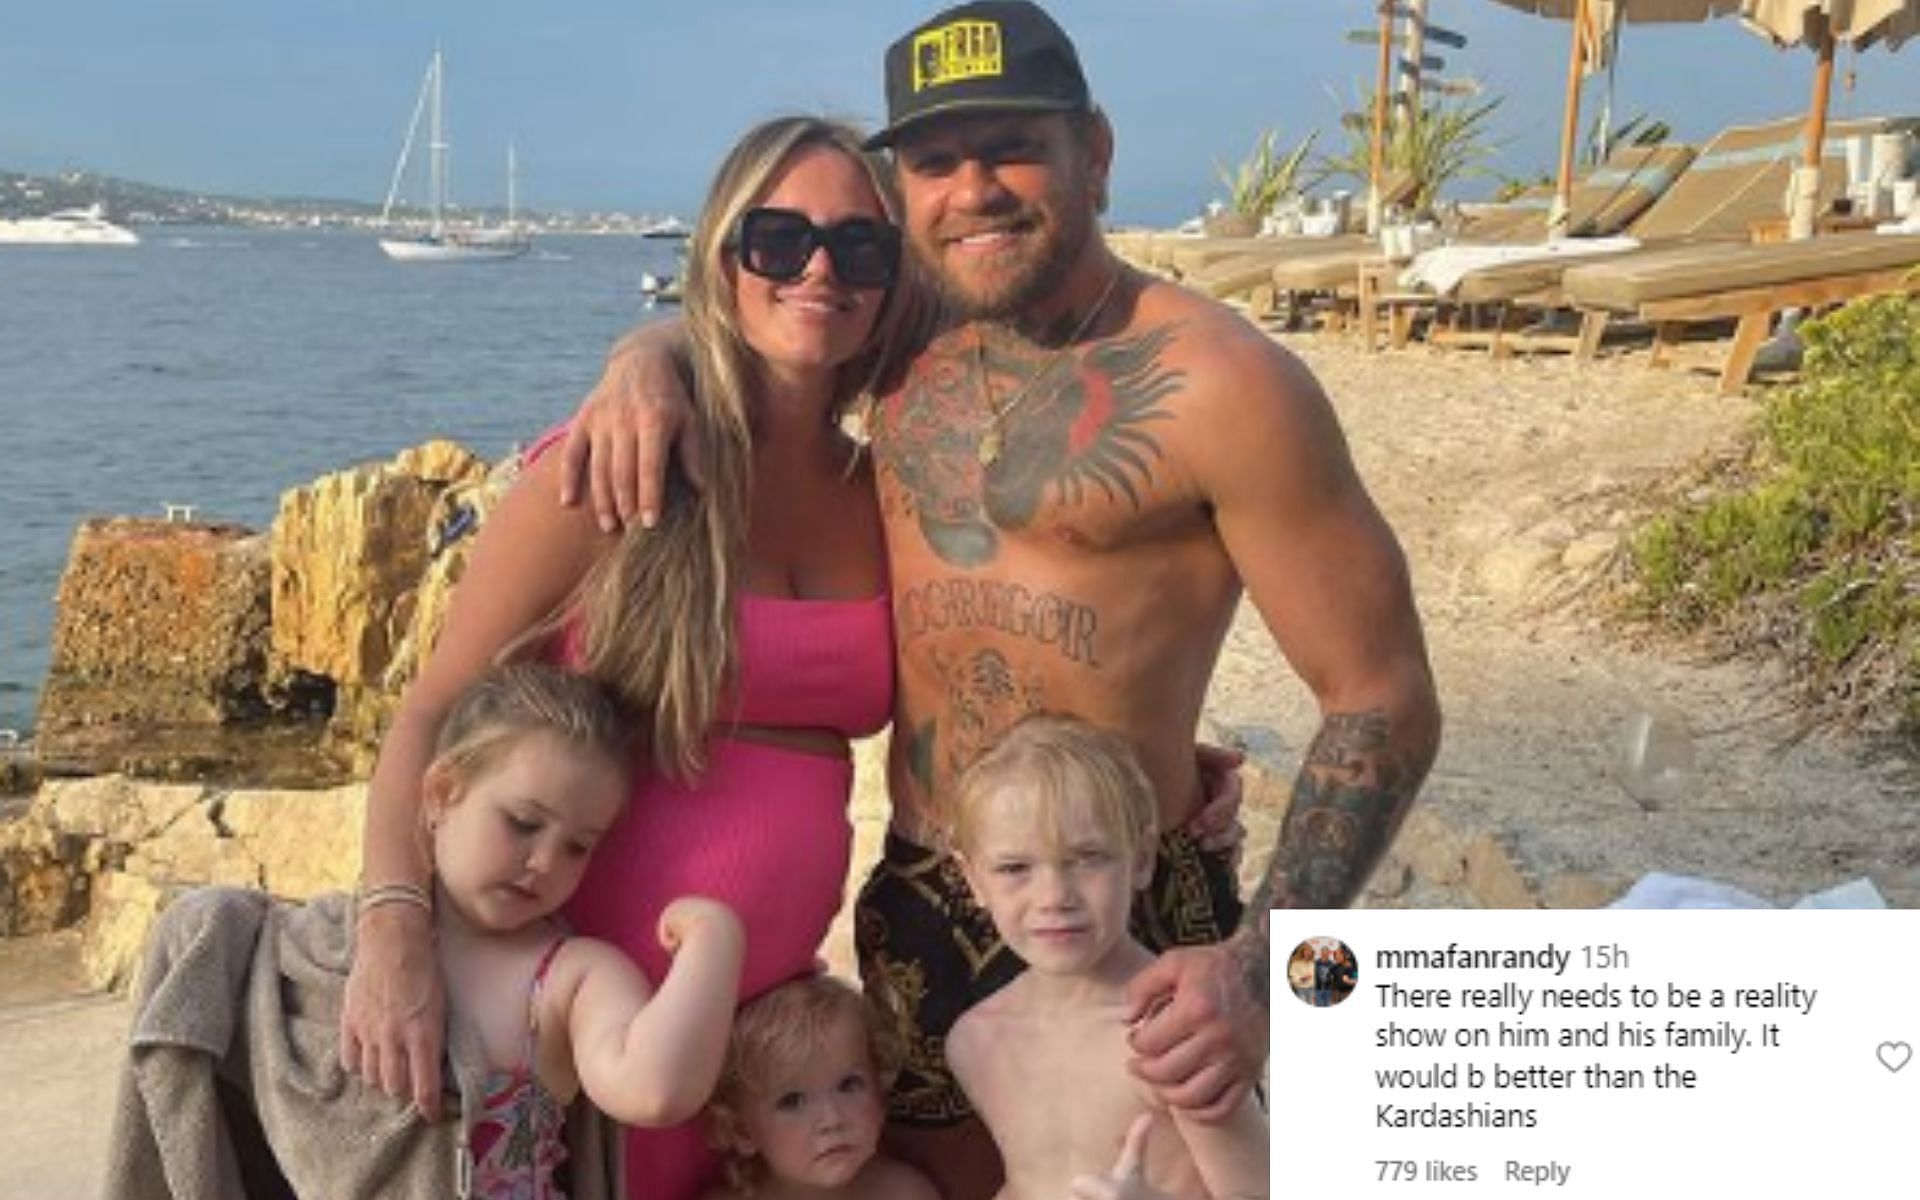 Conor McGregor and his family [Image source: @thenotoriousmma]